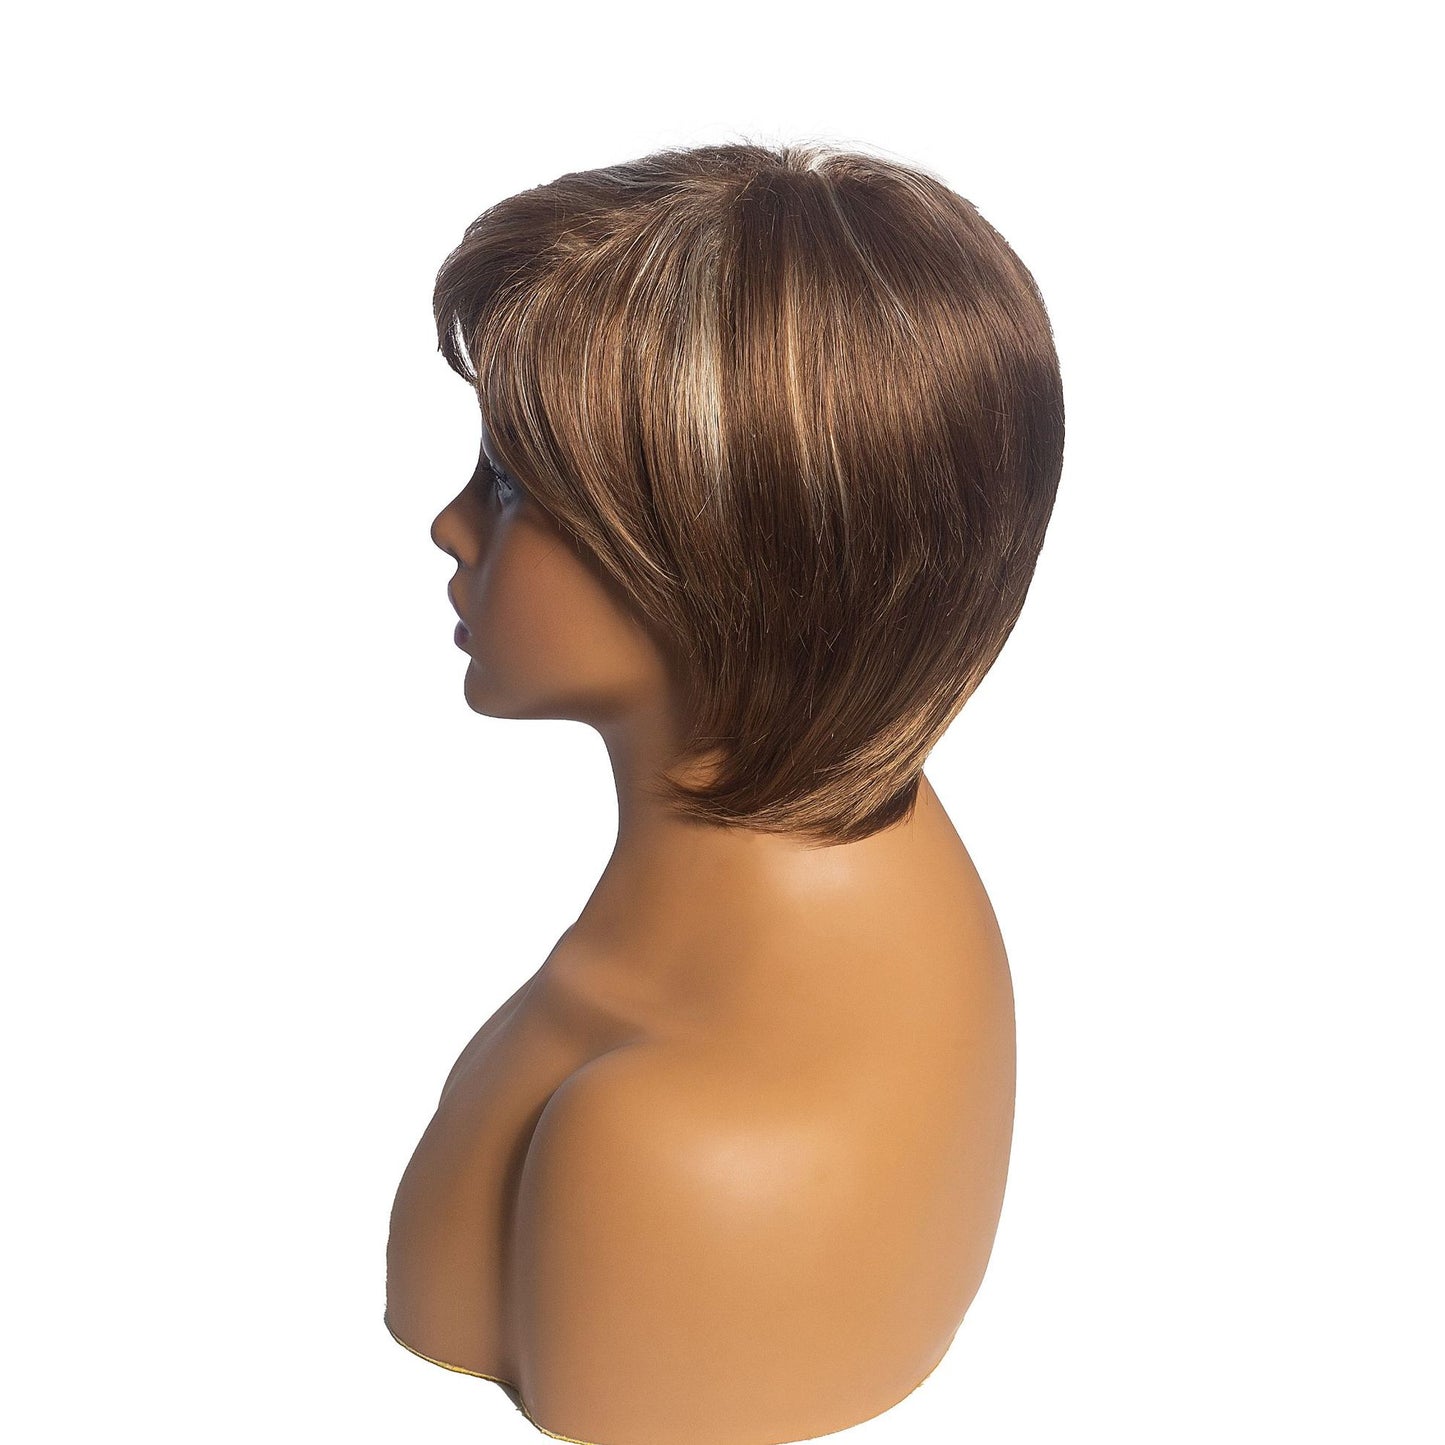 Short Straight Ombre Blonde Wig with Bang for Women Synthetic Natural Hair Wig Dark Roots Heat Resistant Wigs